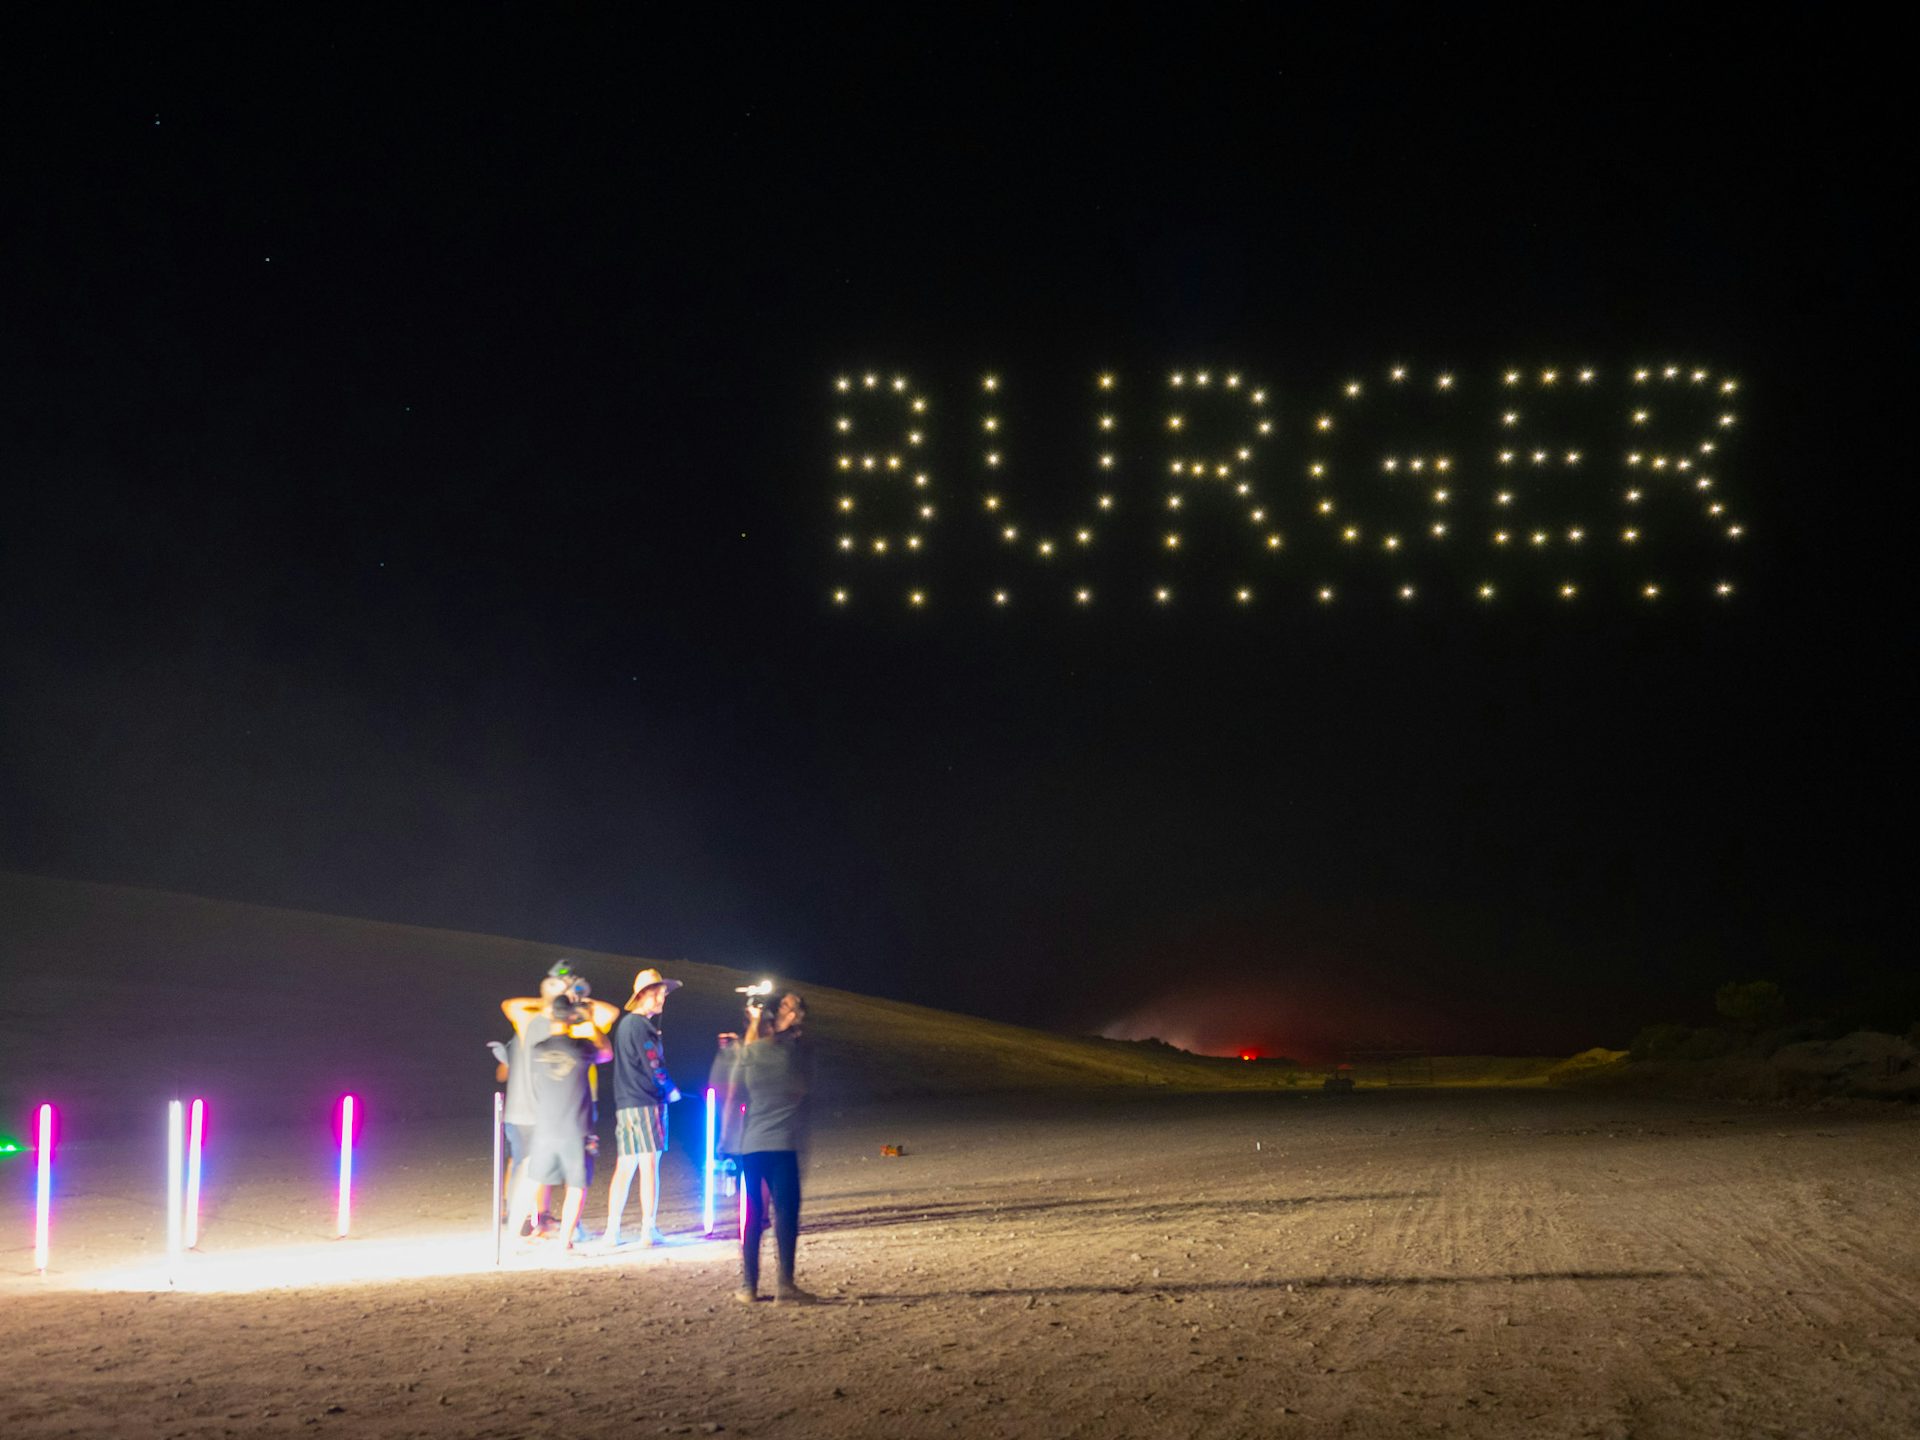 MrBeast spells out &quot;BURGER&quot; in the sky with Verge Aero drones